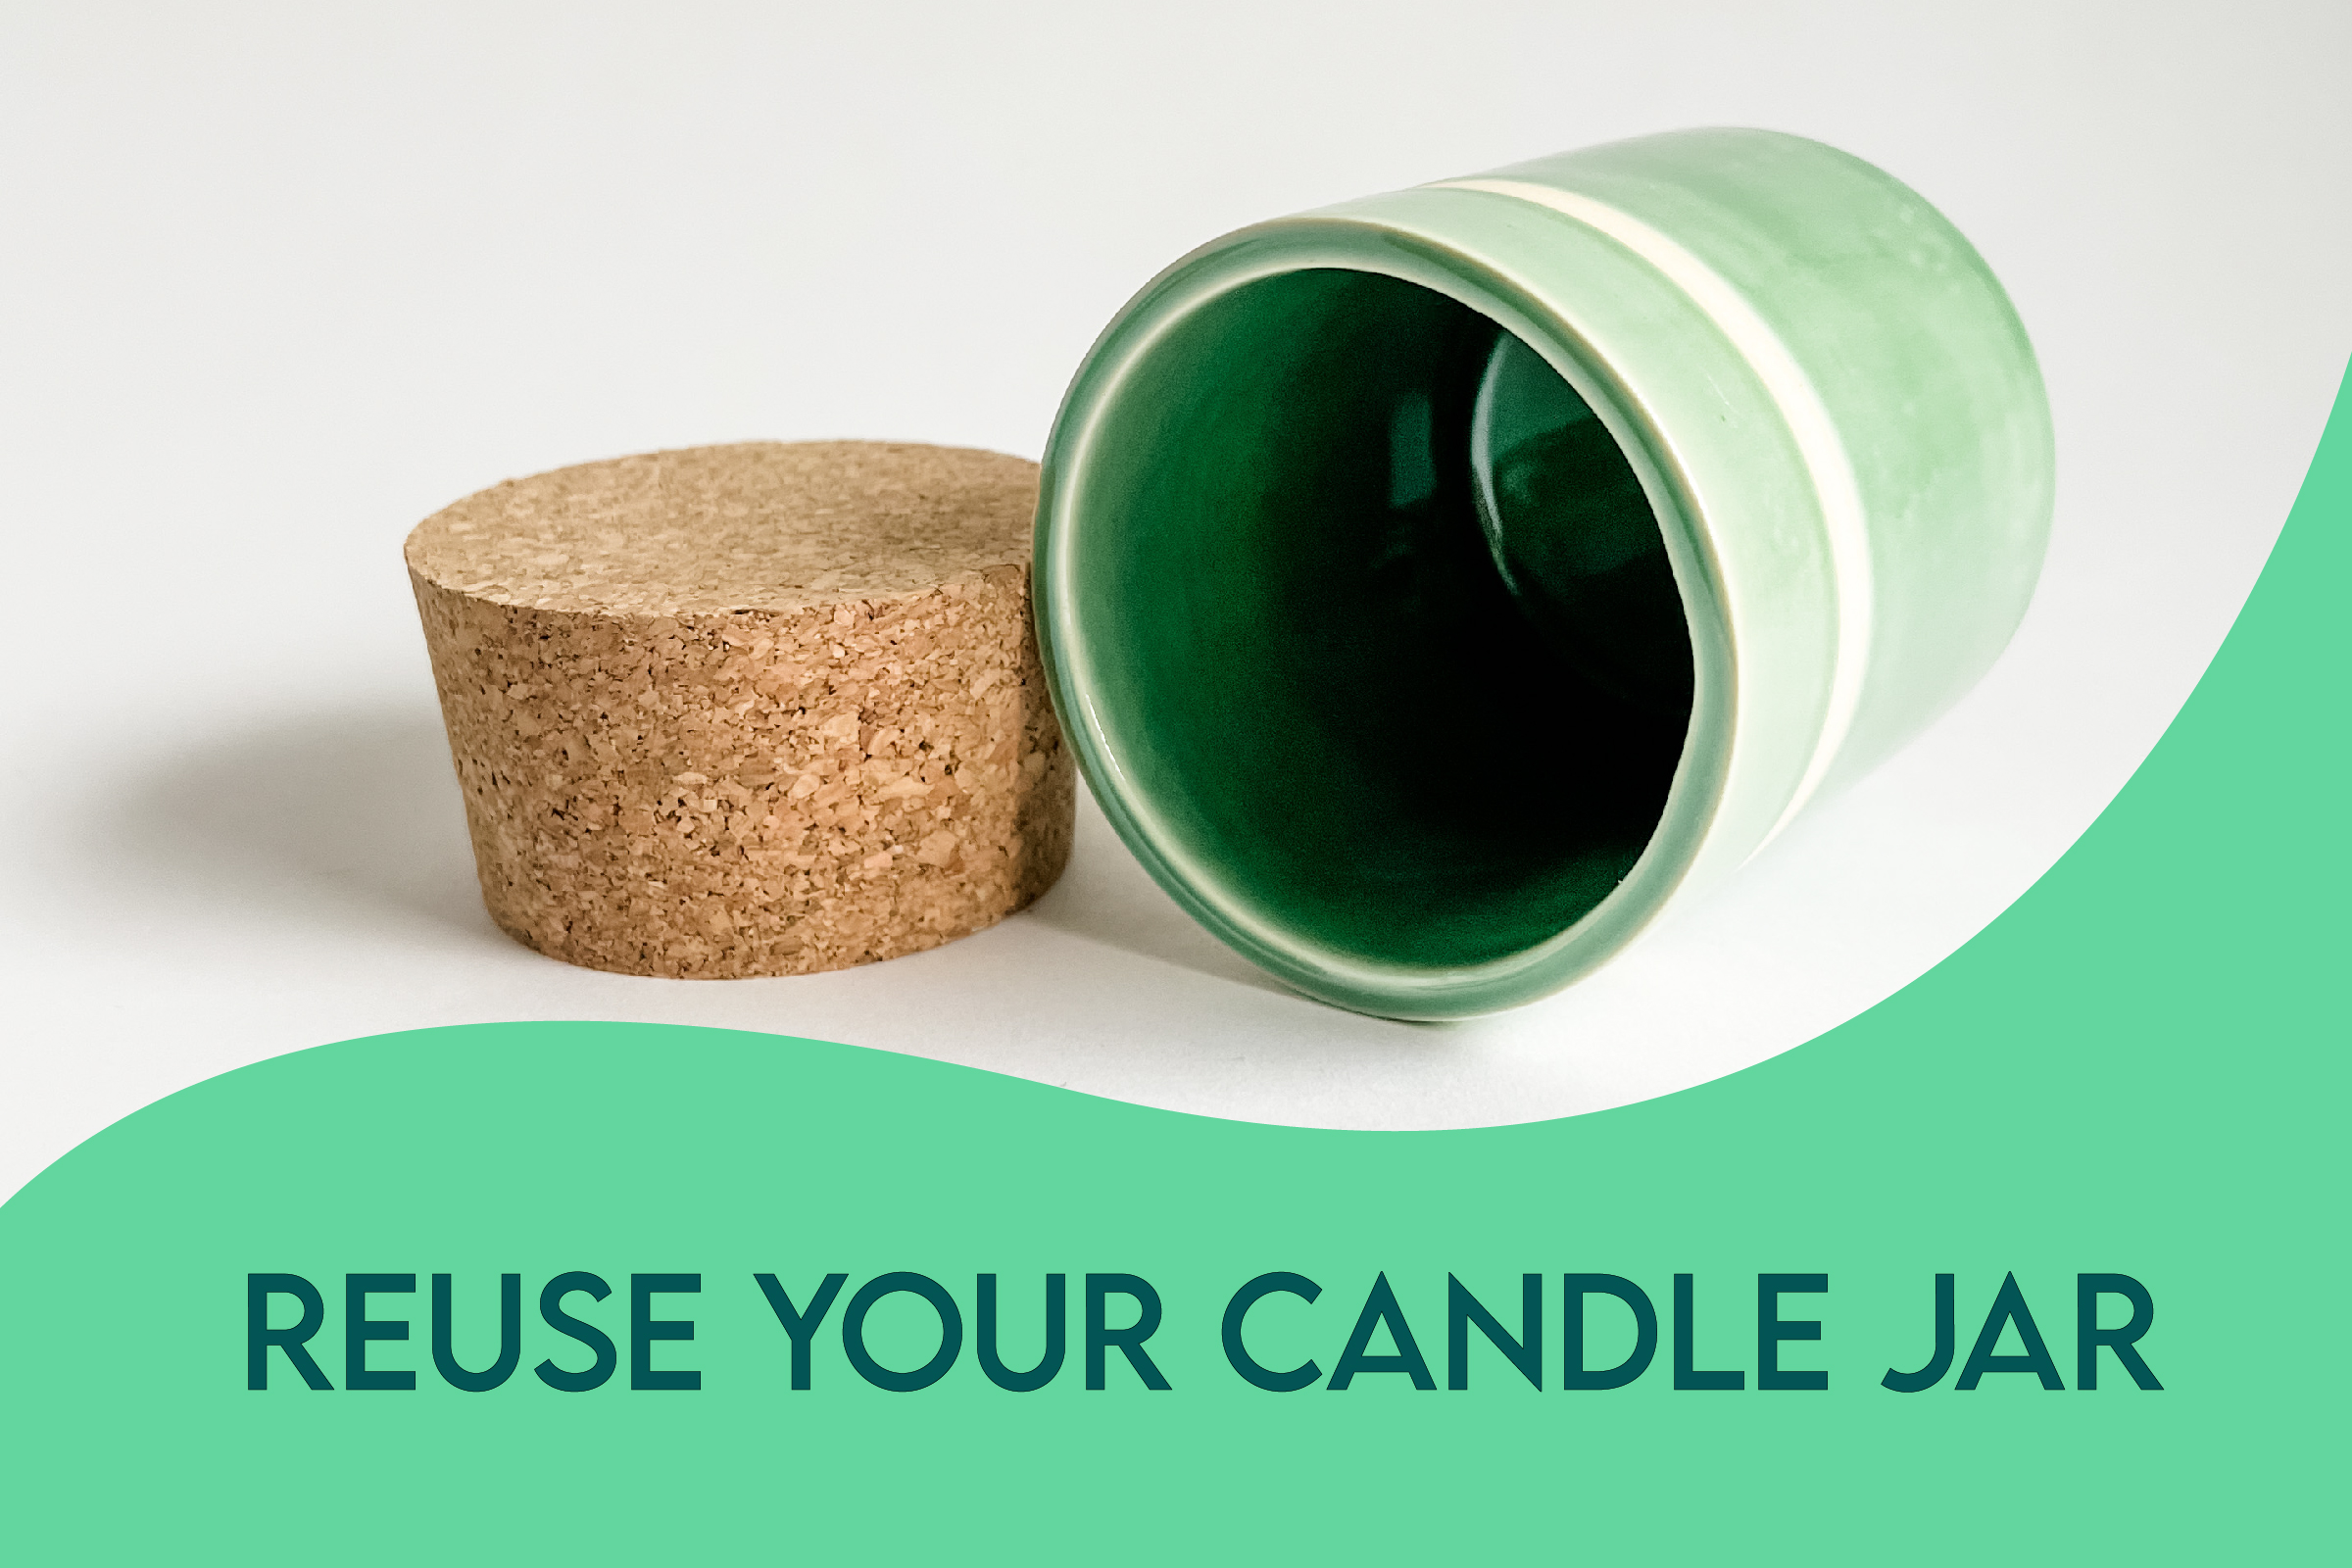 Green ceramic empty candle jar with cork lid. Text on image says reuse your candle jar.